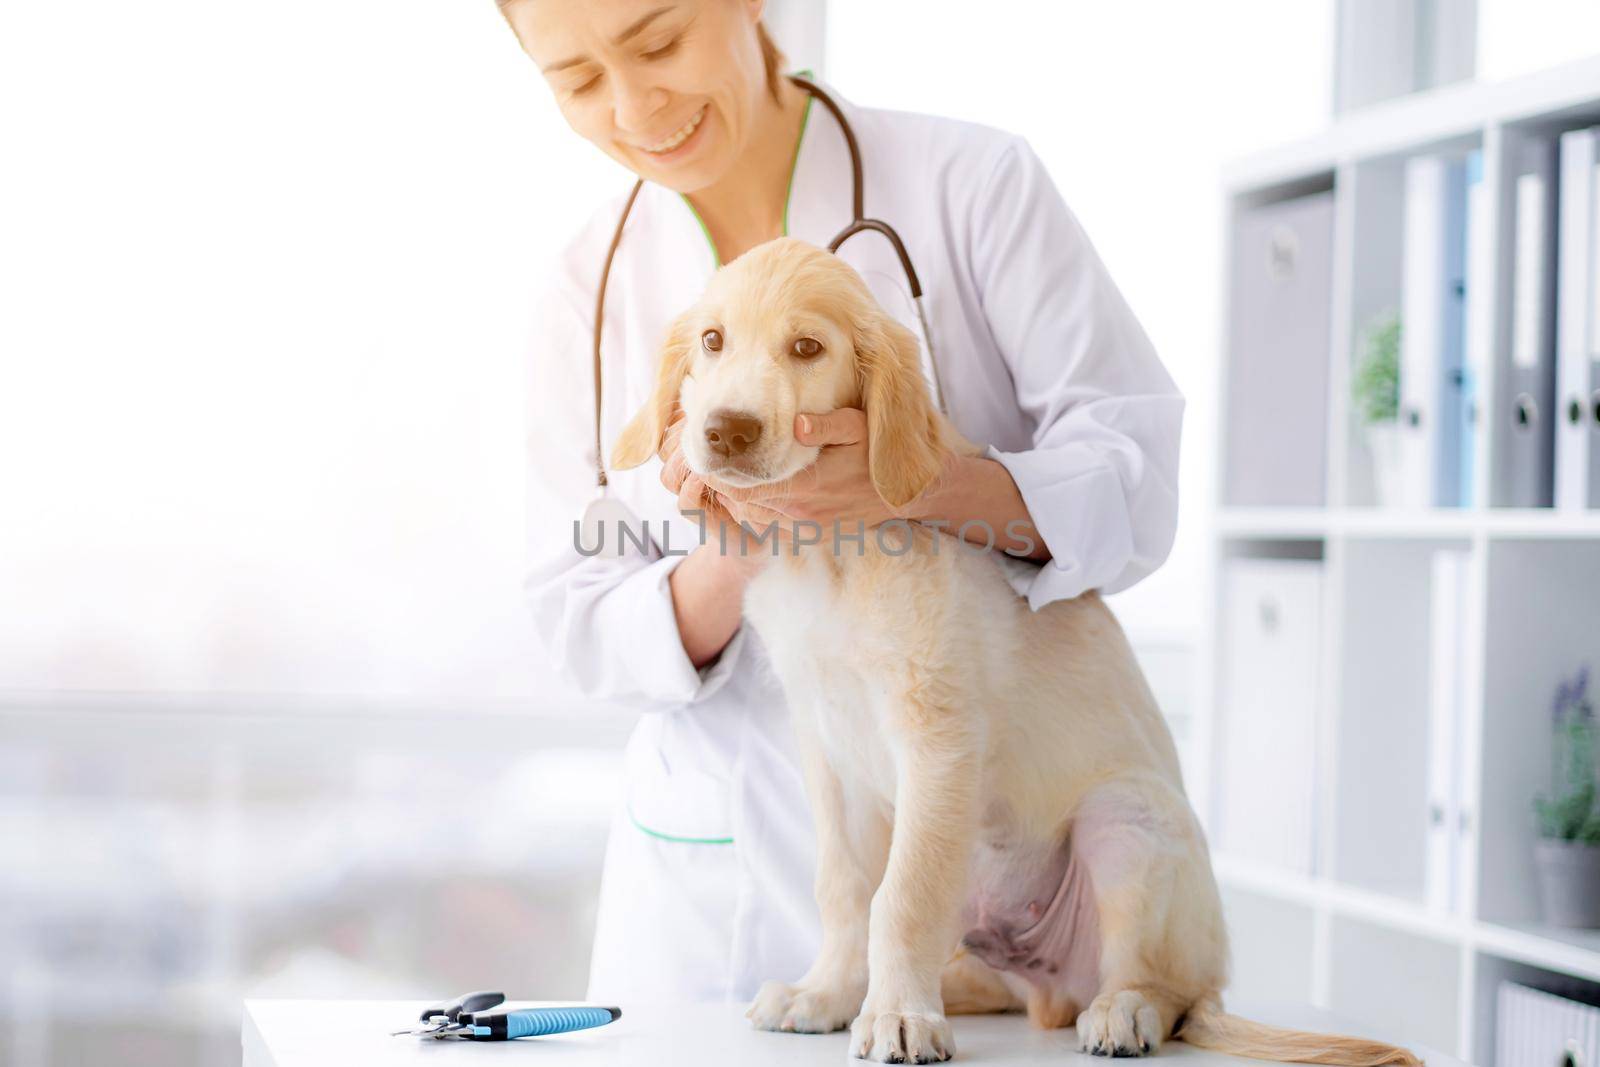 Cute dog examined by doctor at veterinary clinic